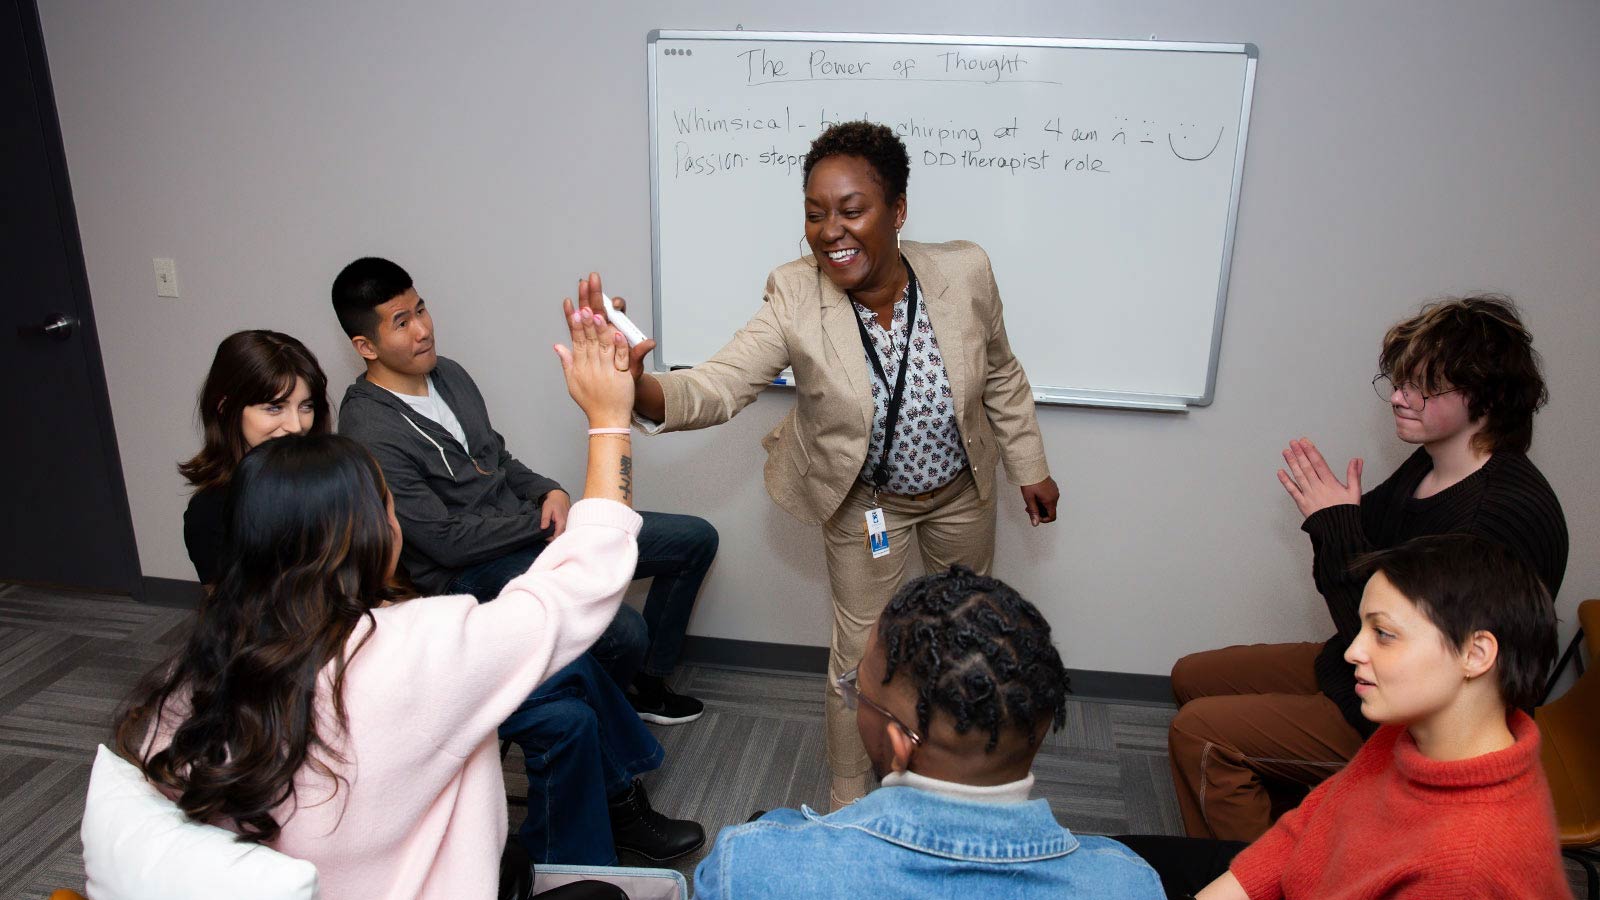 A therapist gives a high five to a participant in a group session, where other attendees are seated in a circle in a room with a whiteboard titled "The Power of Thought".